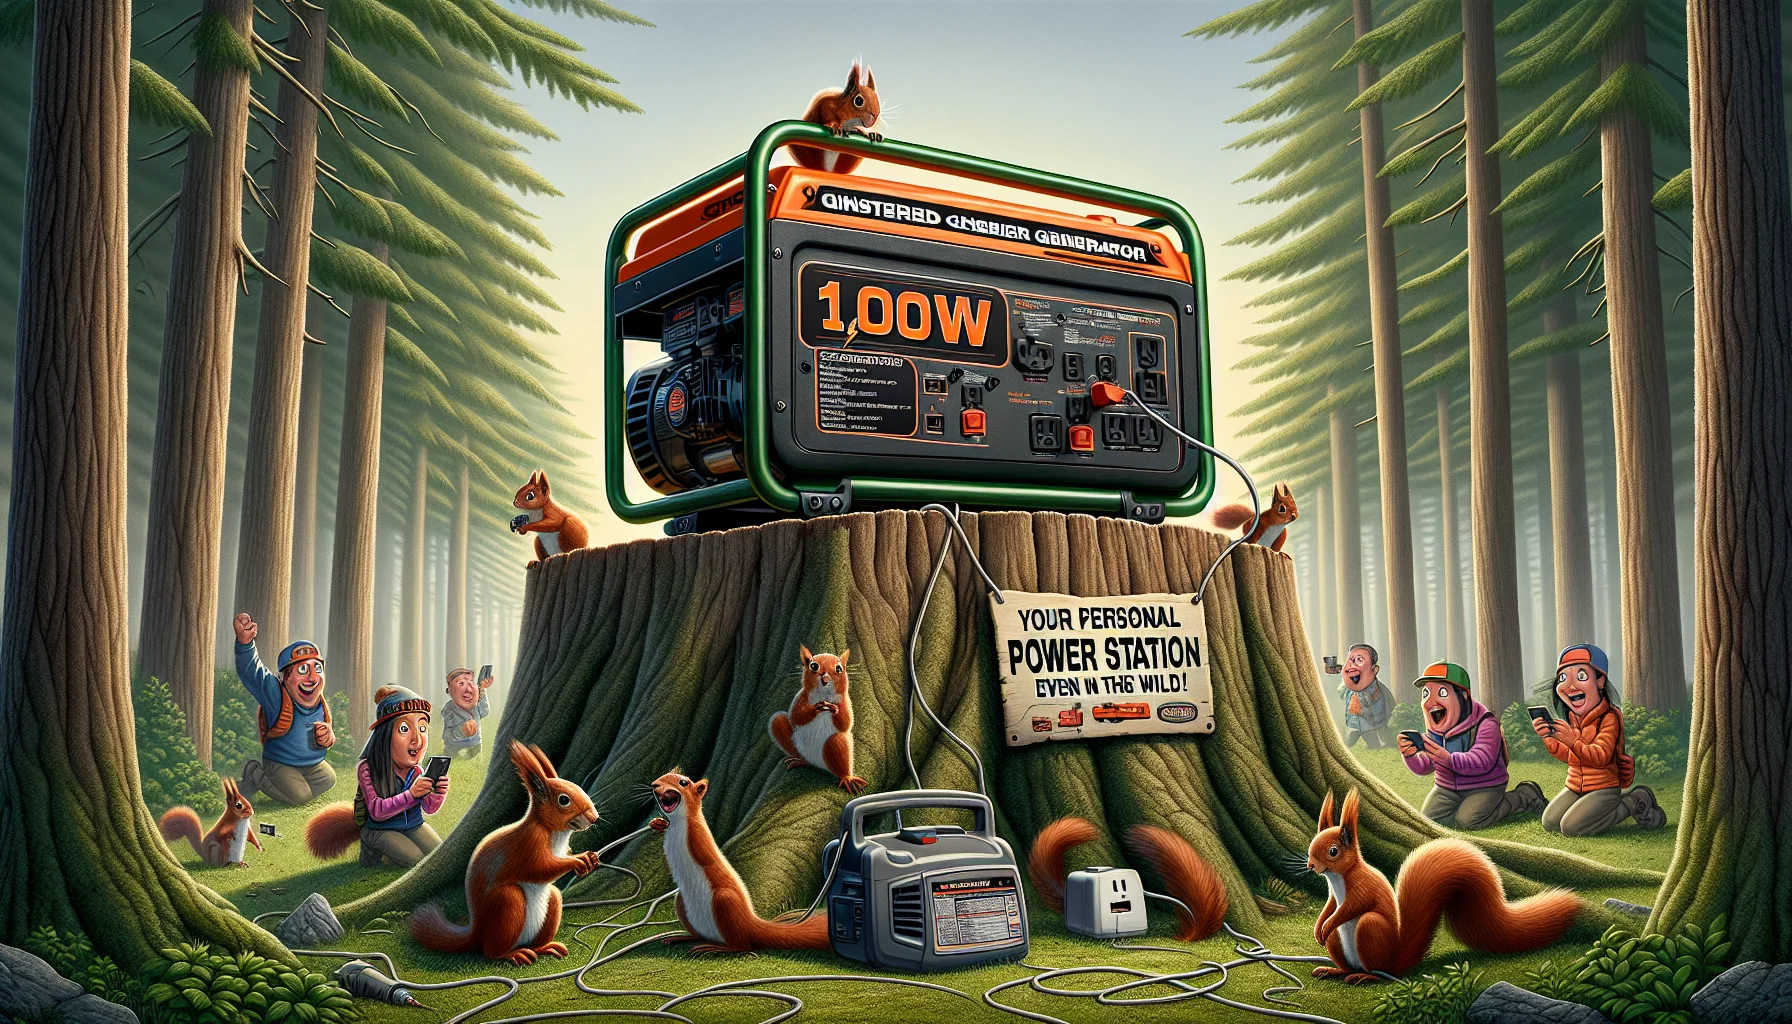 Imagine a humorous scene featuring a powerful 11,000W generator, not tied to a specific brand. The generator is painted bright orange and is working diligently in an unexpected place - atop a large tree stump in the middle of a serene forest. Near the generator, a pair of skeptical squirrels are cautiously inspecting it, while a group of excited hikers stares in awe, charging their devices via a multi-outlet extension cord. The generator should appear to be making a loud, triumphant hum, encouraging everyone in the forest to get their 'work' done. A satirical sign next to it reads 'Your personal power station, even in the wild!'